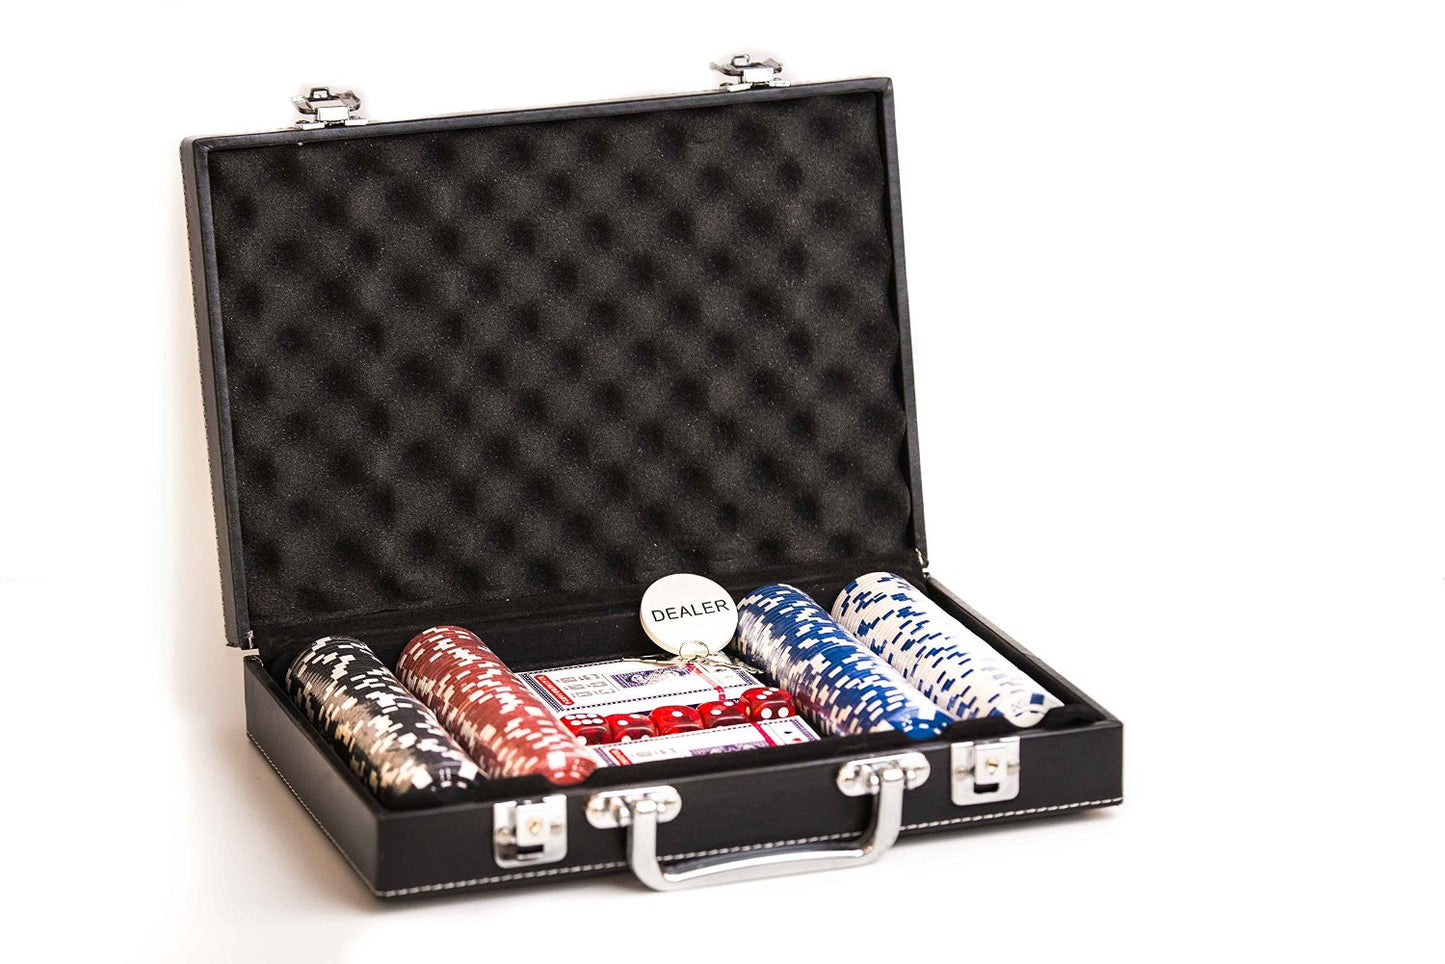 200 Striped Dice Poker Chips with Leatherette Case